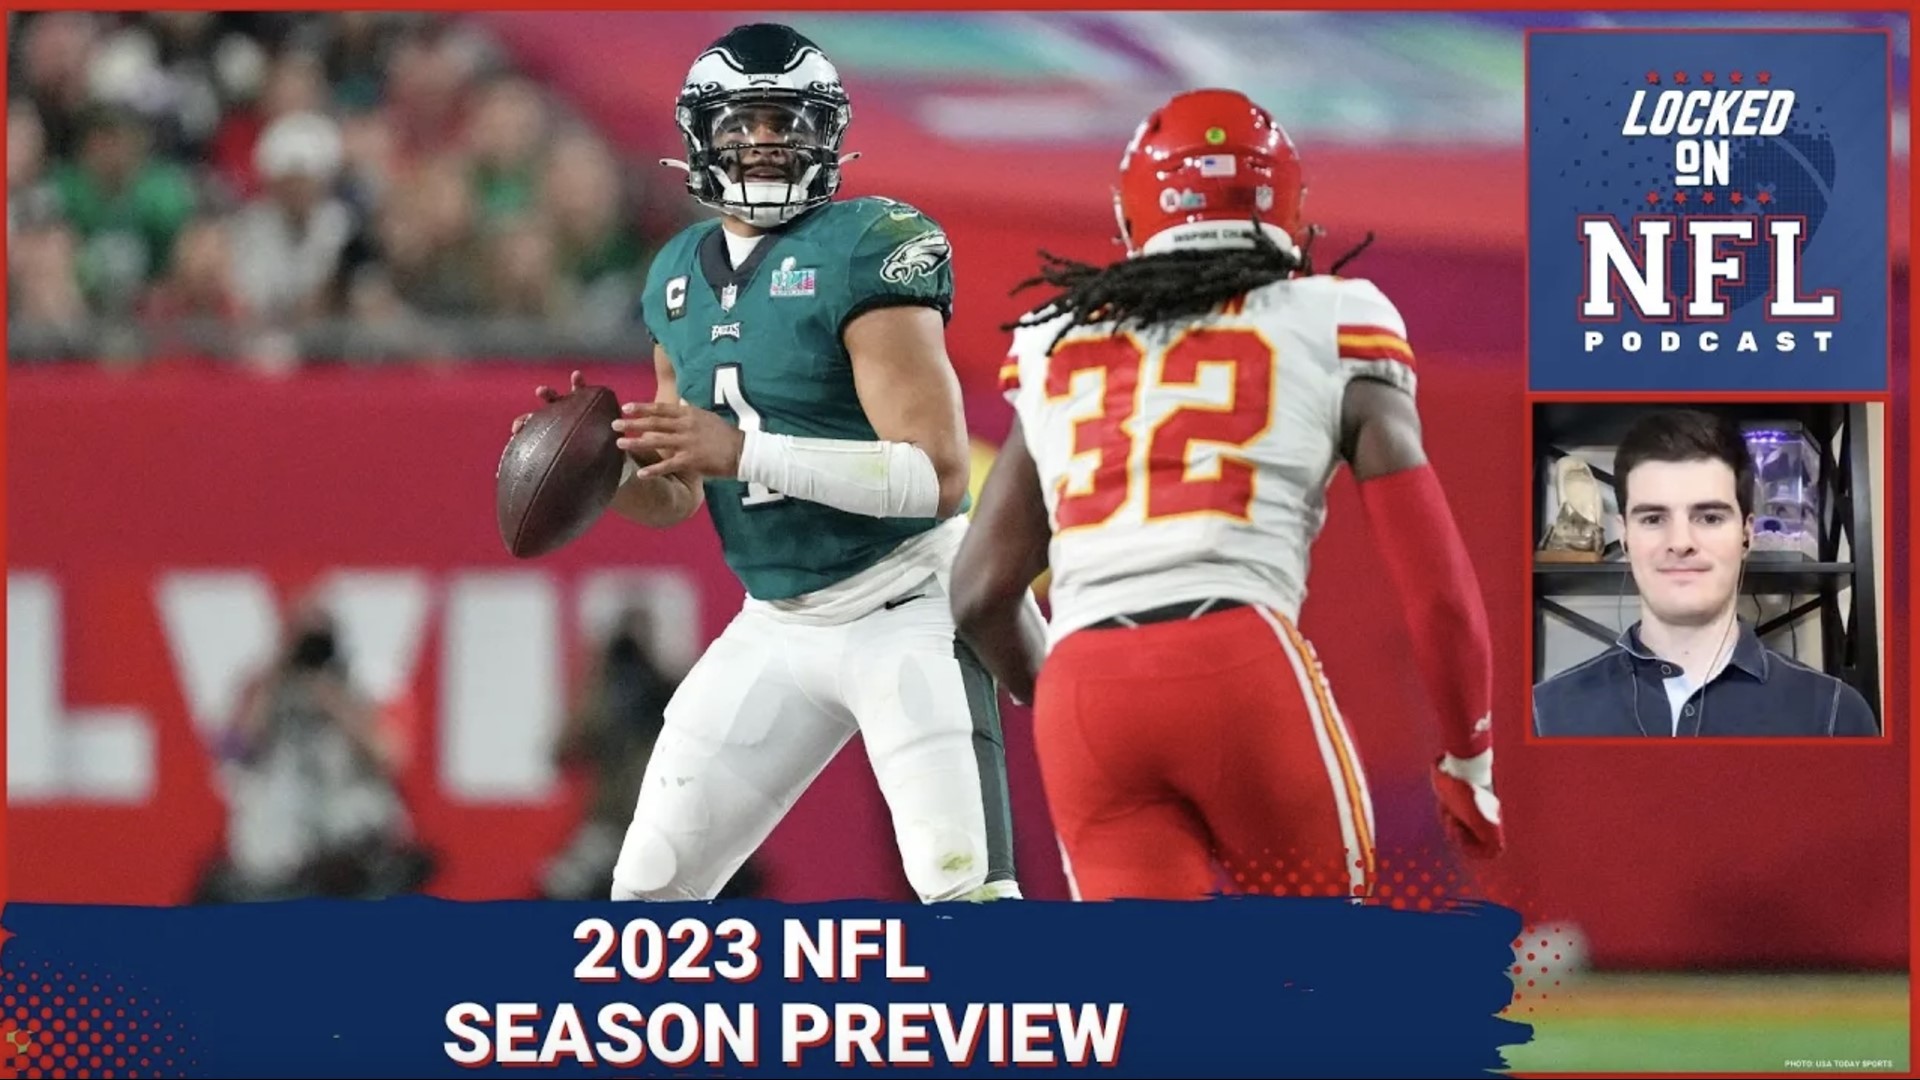 Previewing the 2023 NFL season with team, player, division and